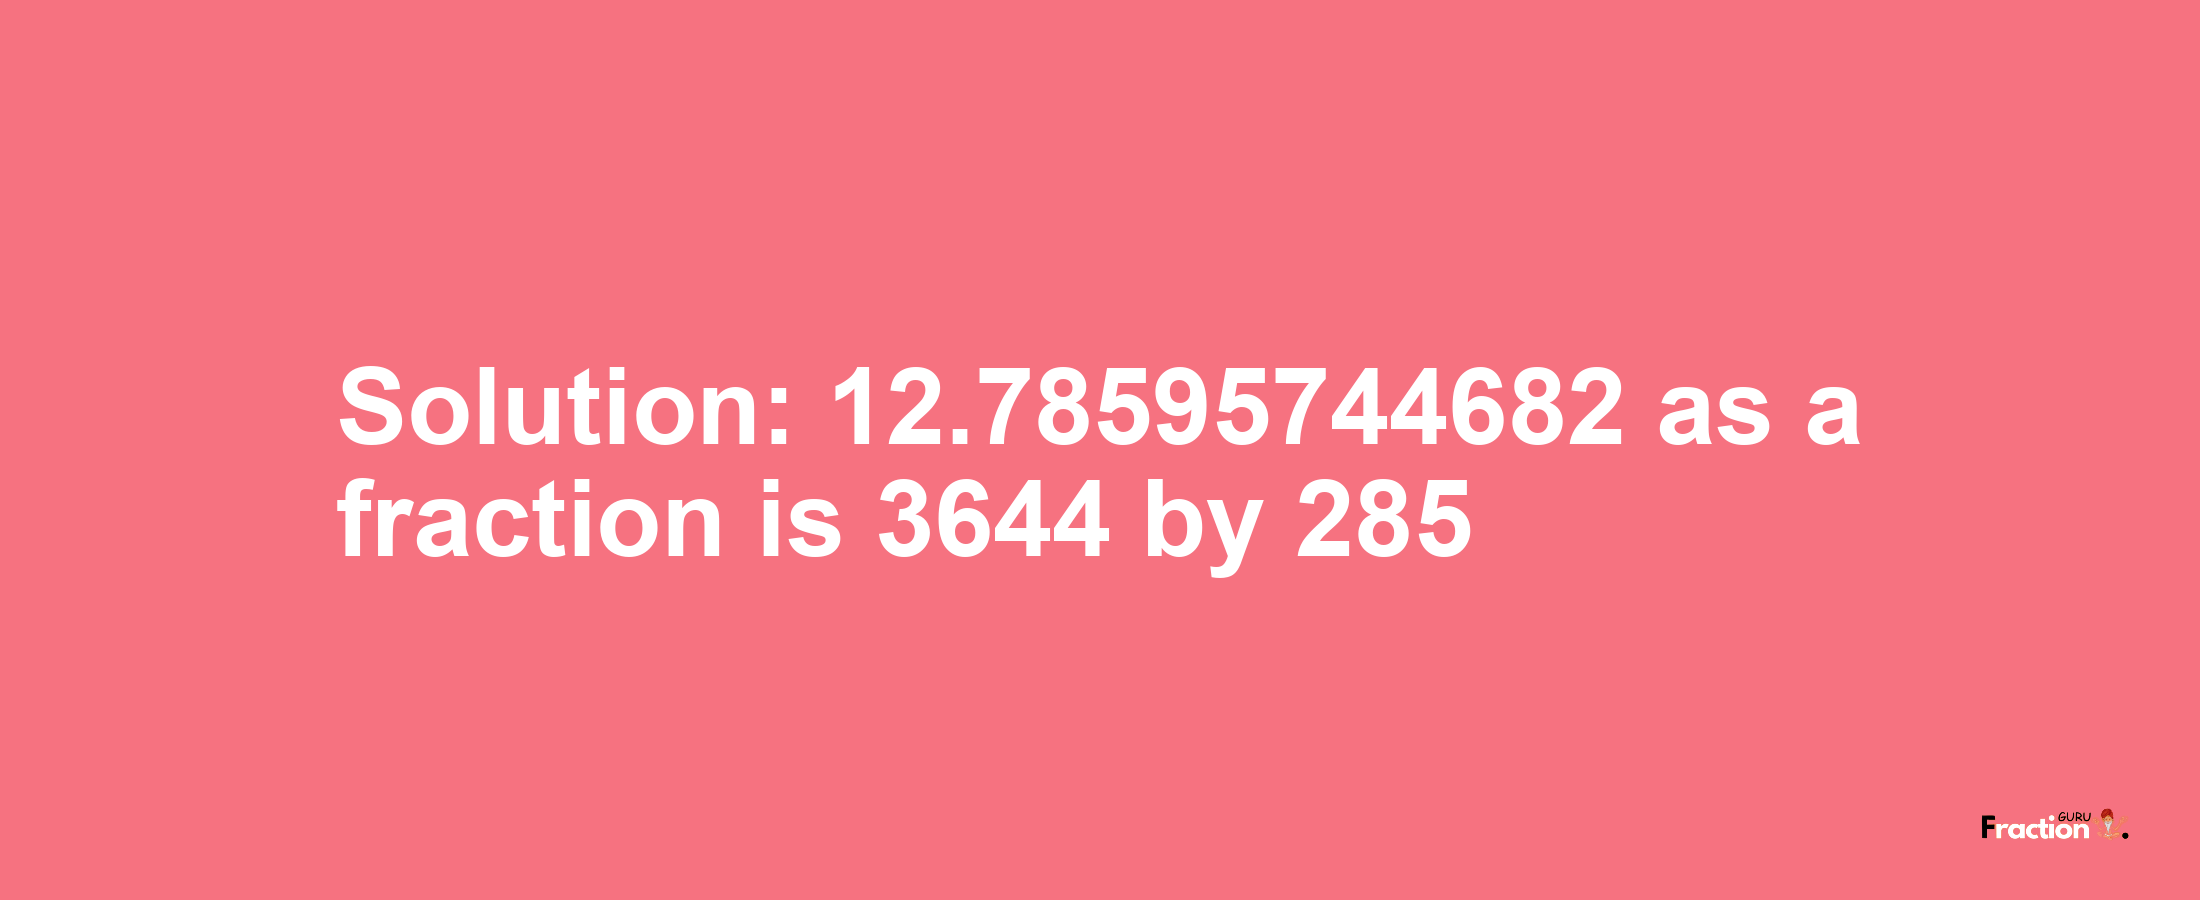 Solution:12.78595744682 as a fraction is 3644/285